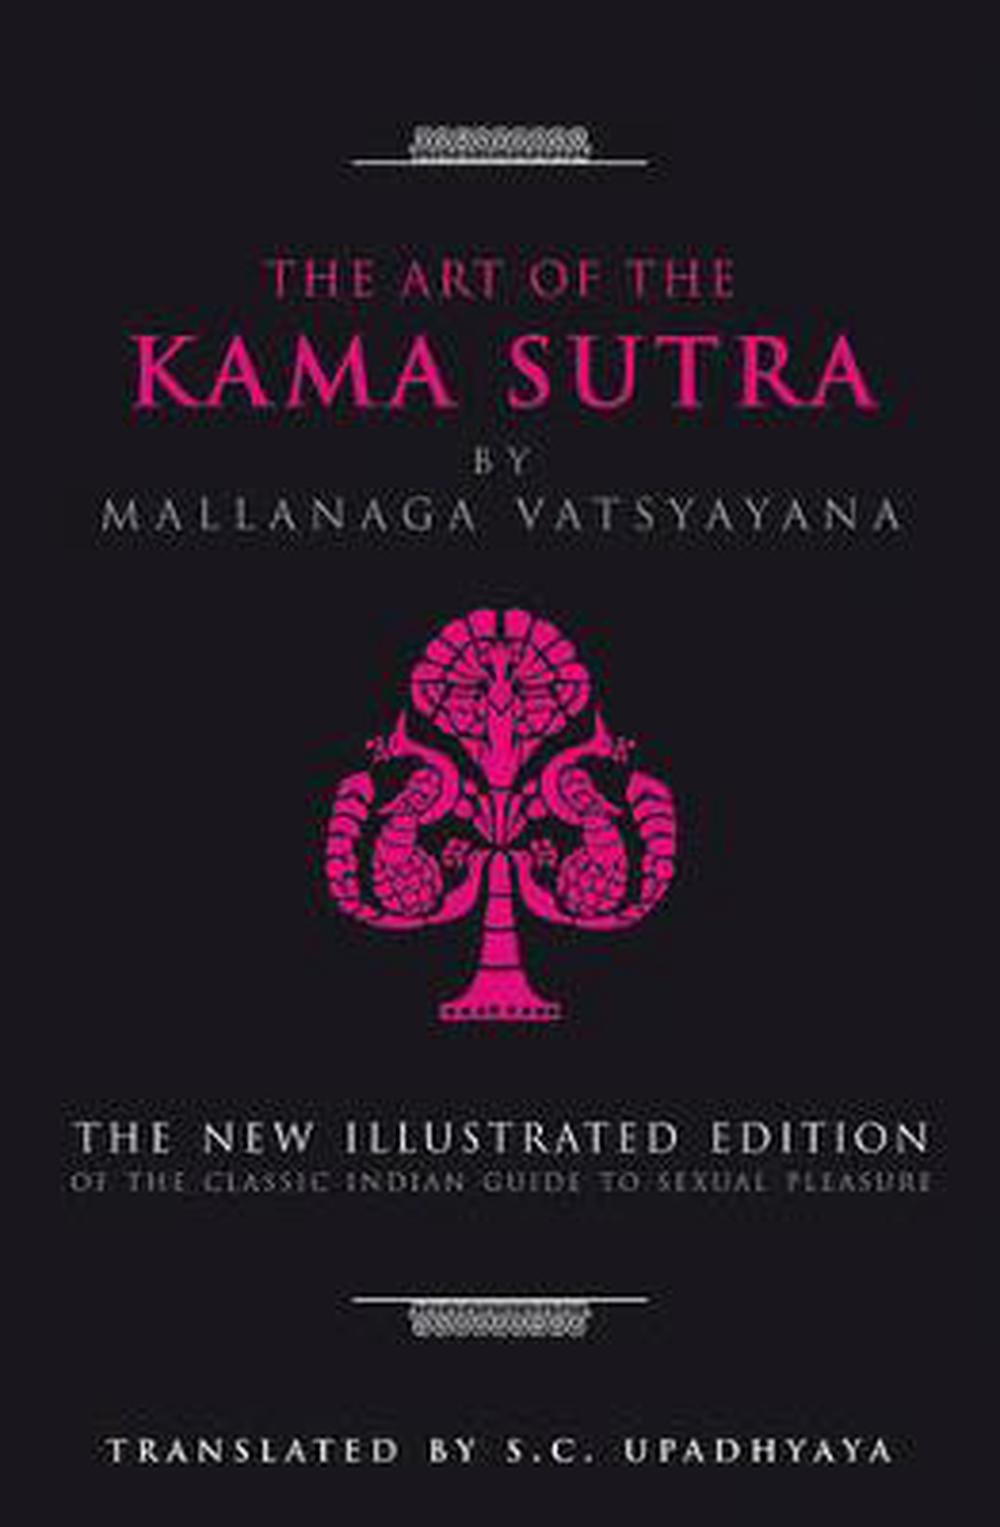 The Art Of The Kama Sutra By Vatsyayana Mallanaga Hardcover 9781907486302 Buy Online At The Nile